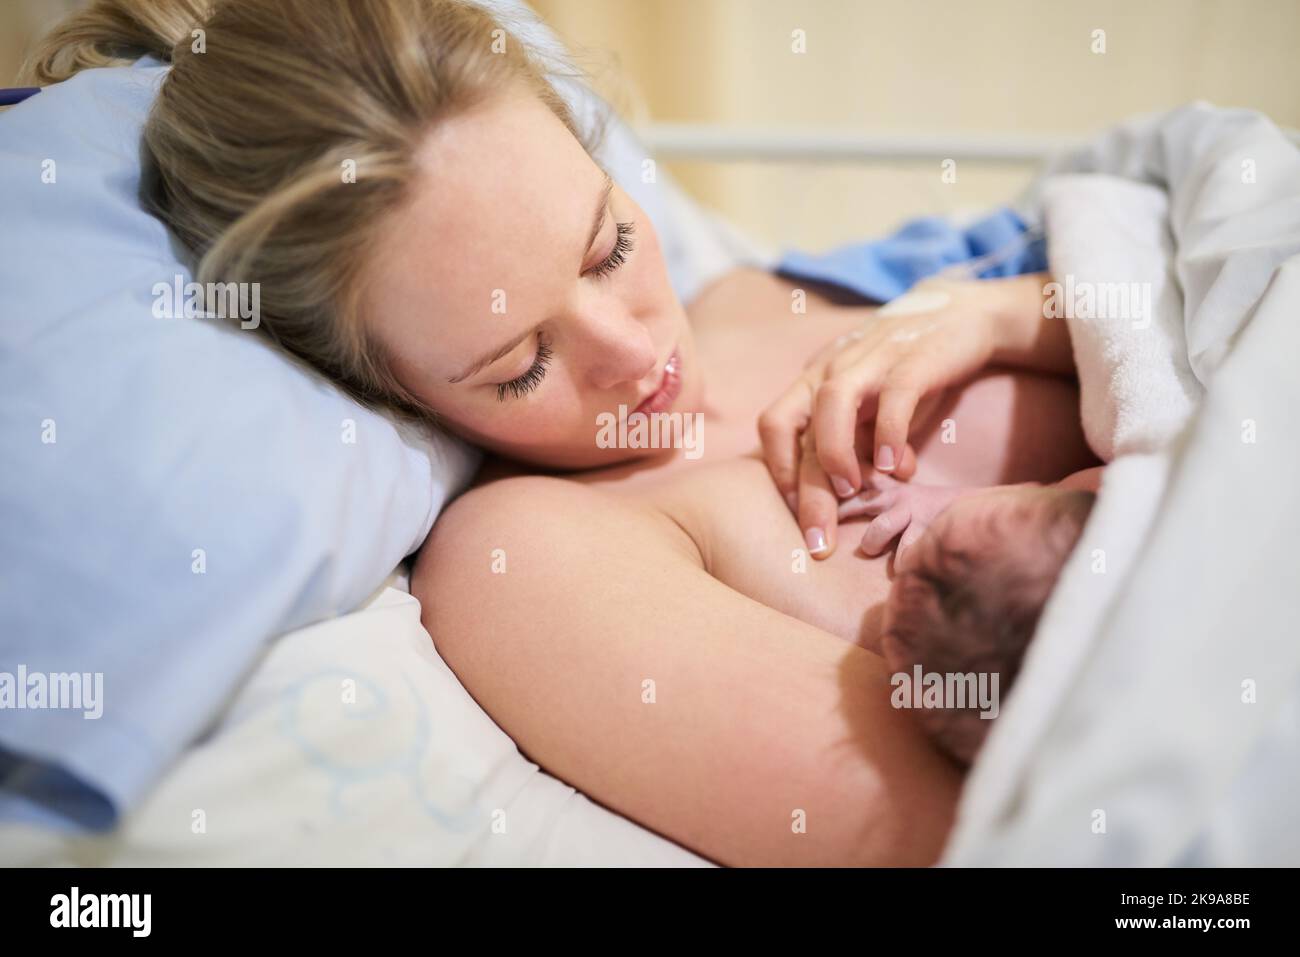 Her tiny little hands will touch so many lives one day. a beautiful young mother lying in bed with her newly born baby girl in the hospital. Stock Photo